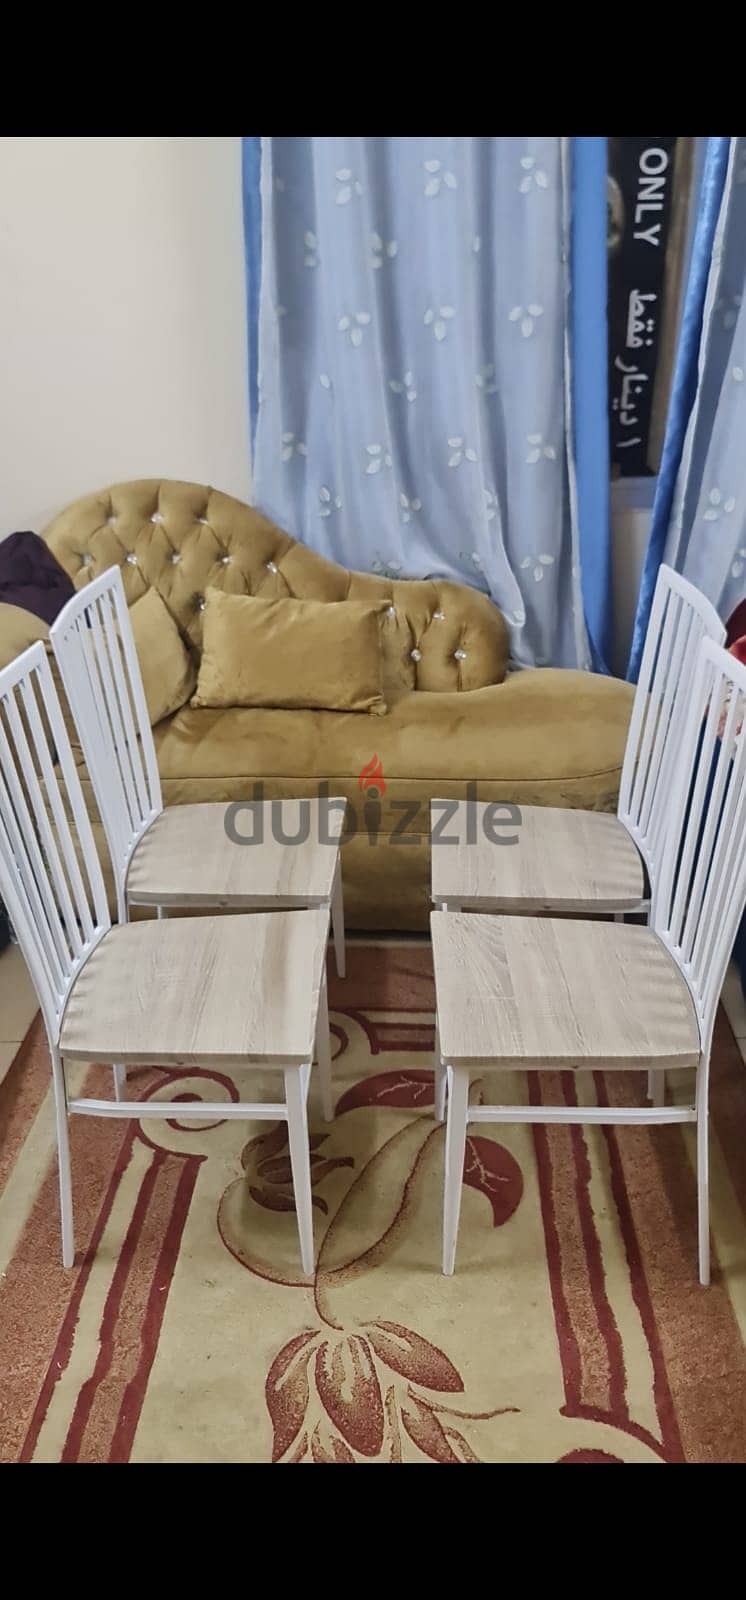 TABLE WITH 4 CHAIRS 2